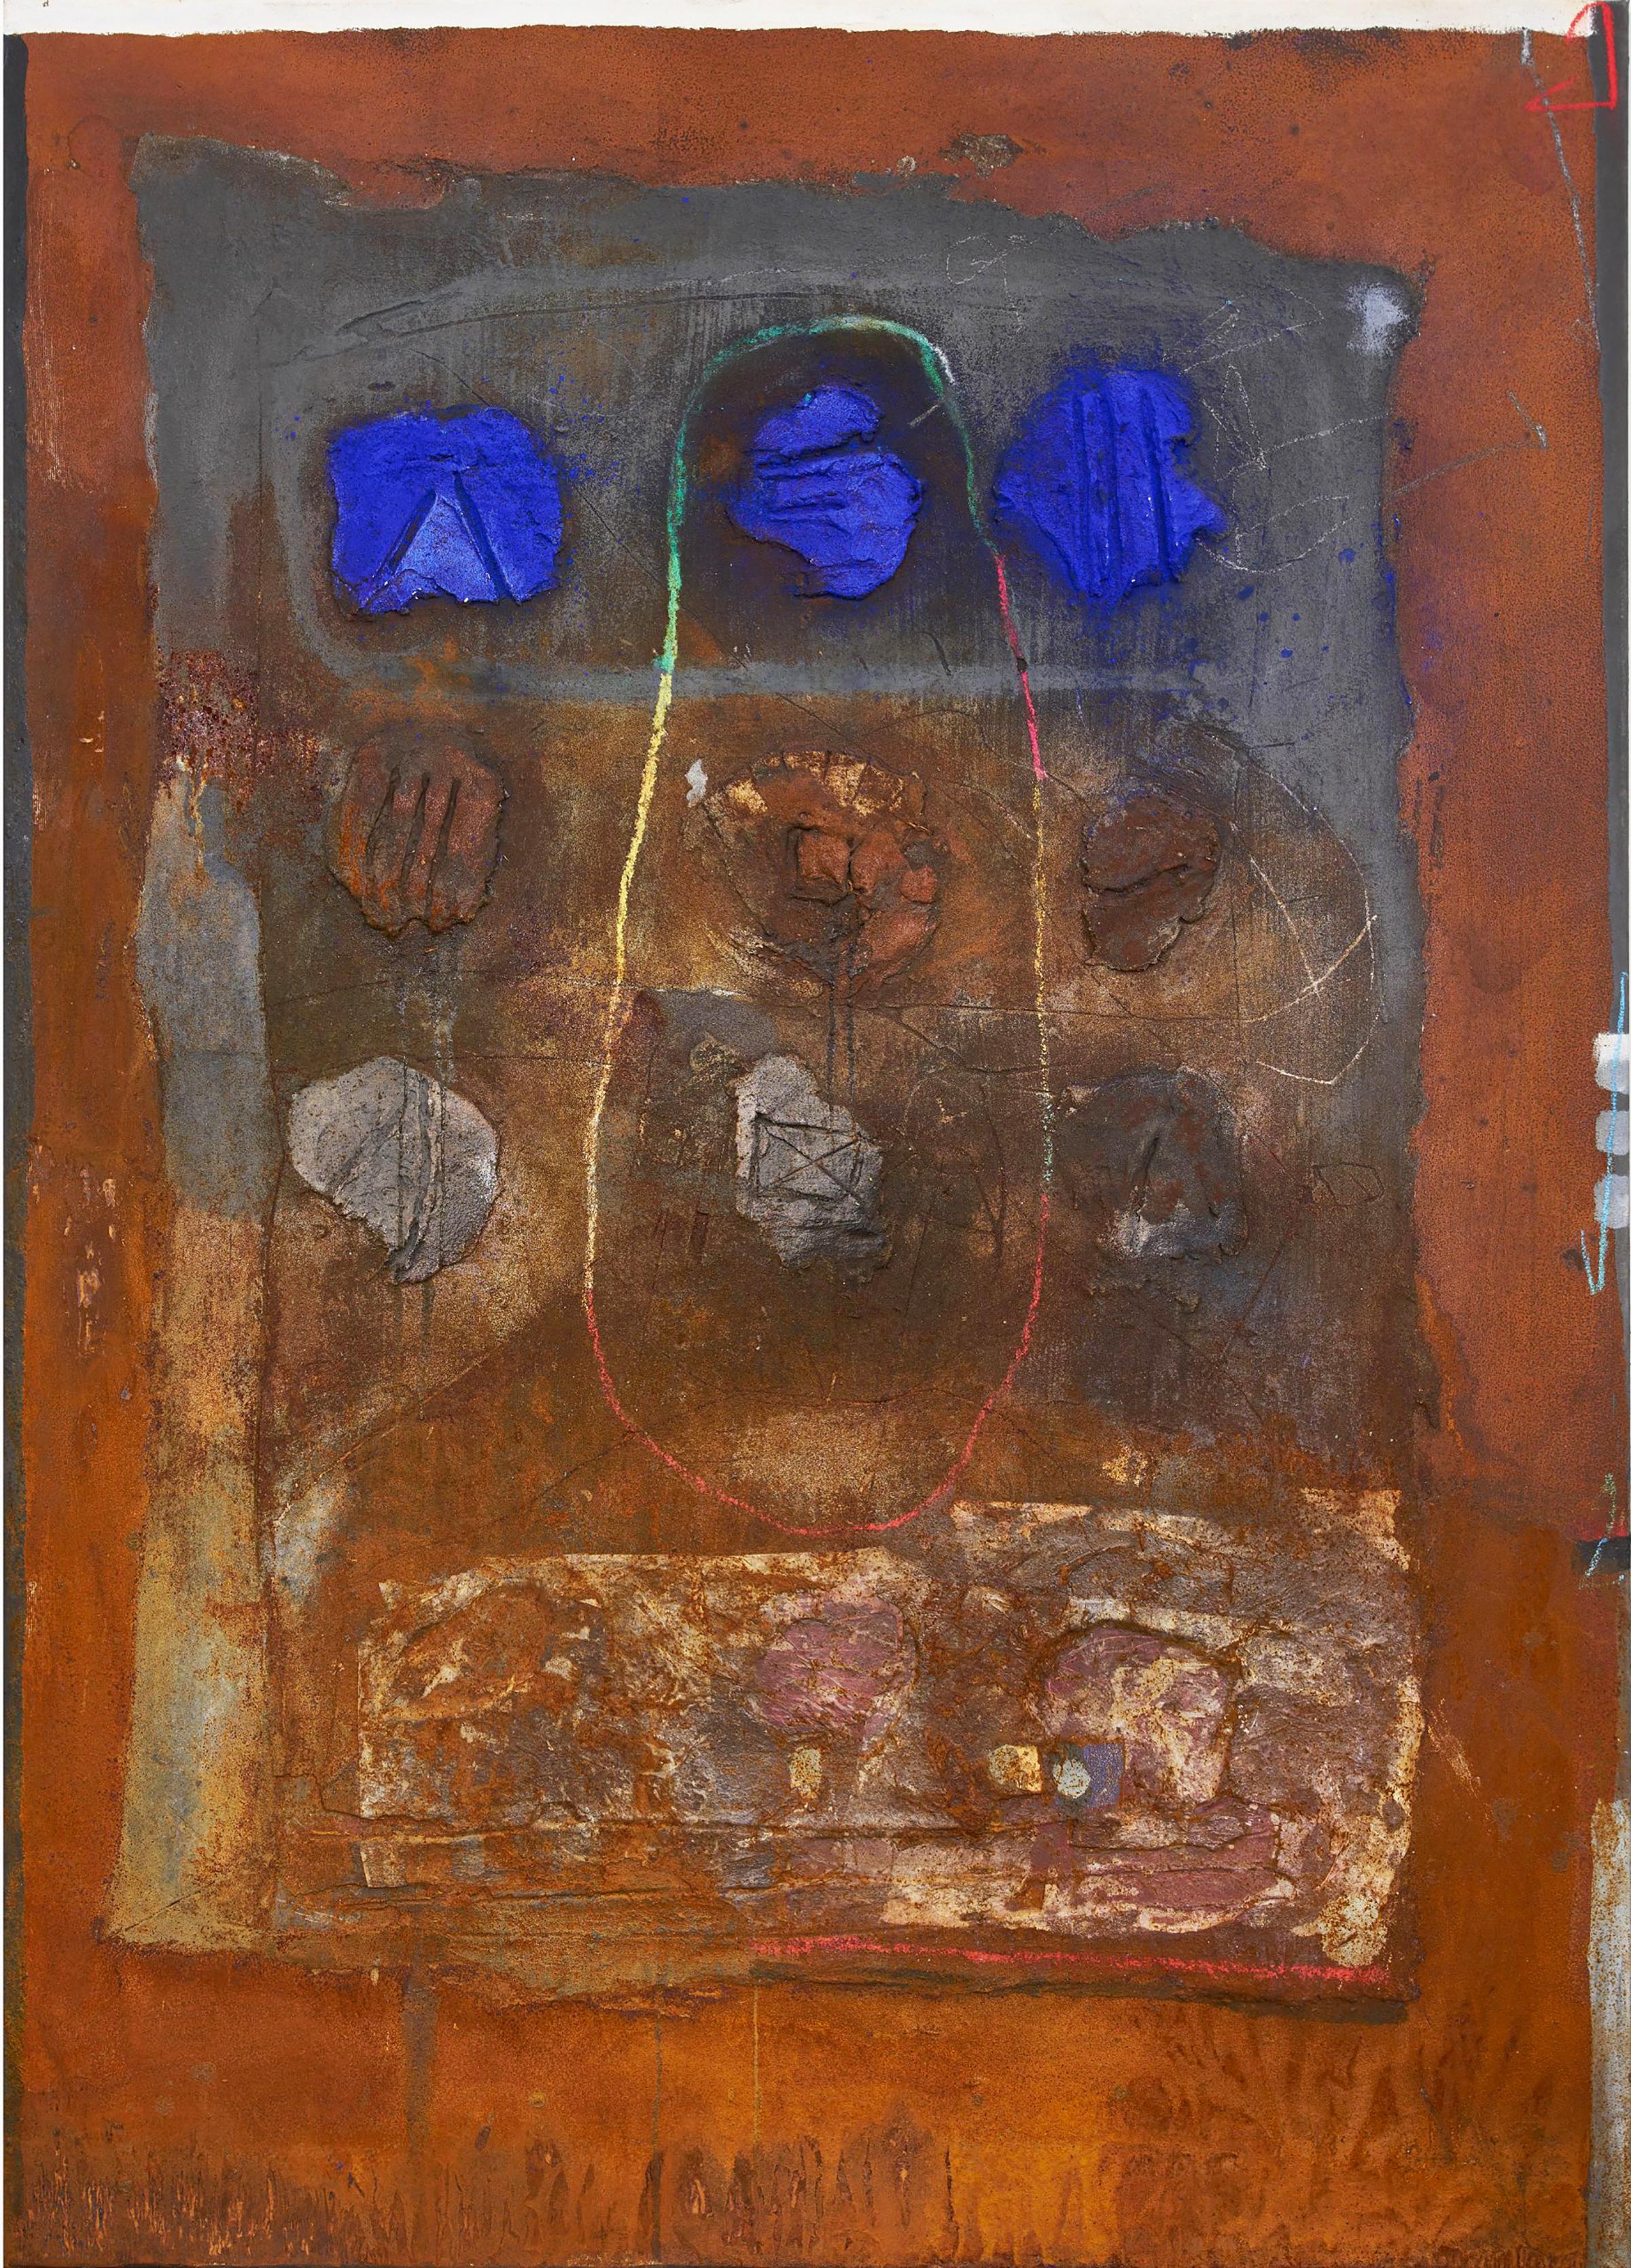 Rolf Hegetusch "The Nine Seals", mixed media on canvas